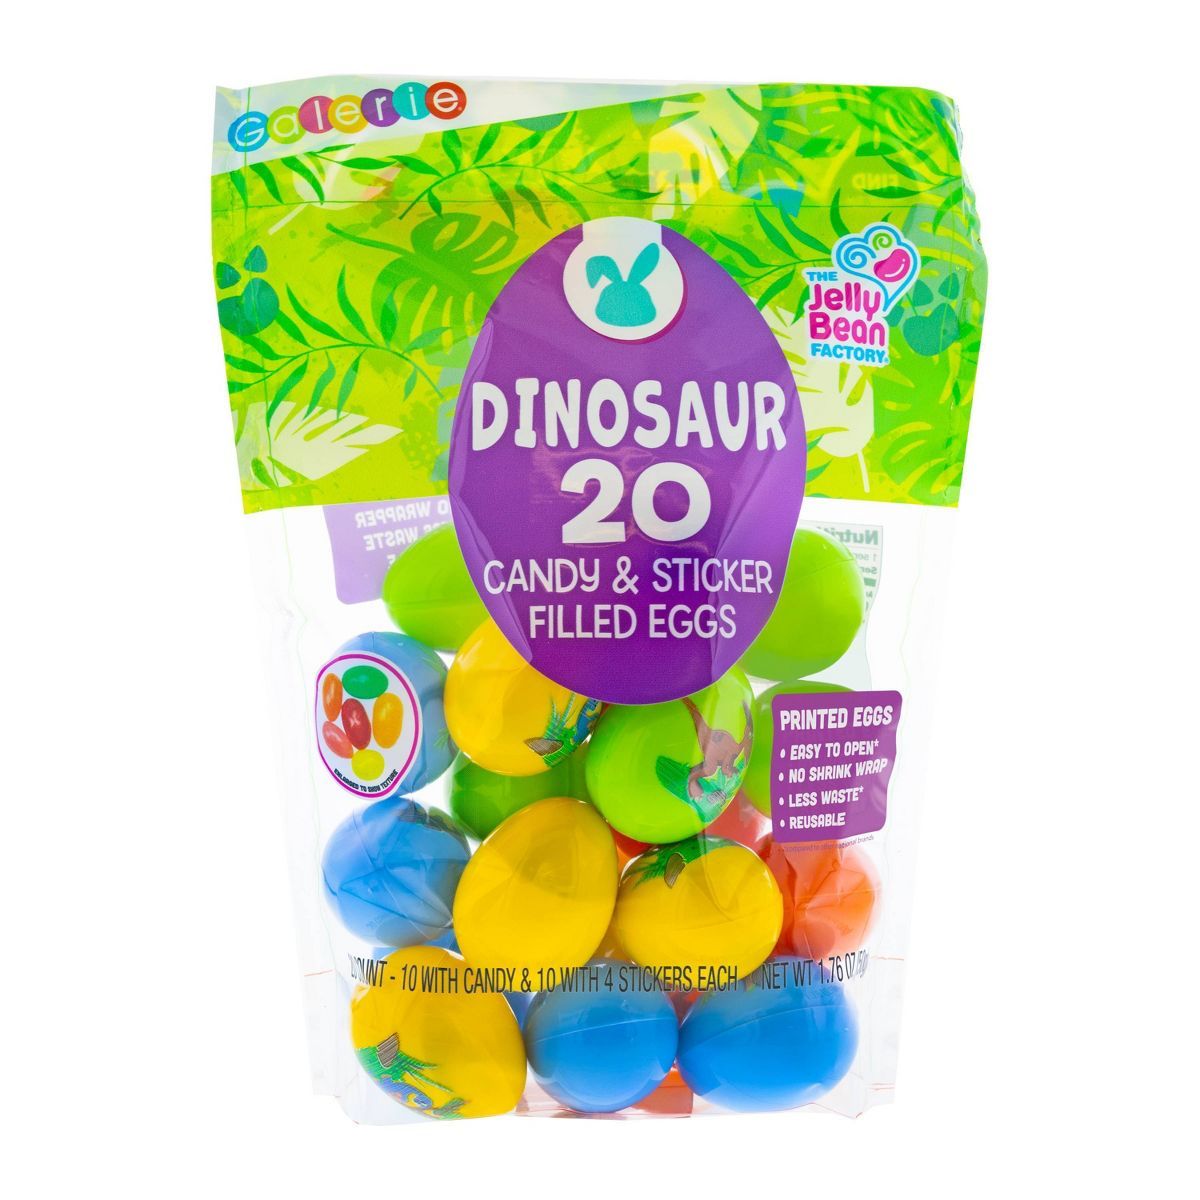 Galerie Easter Printed Dino Attack Egg Bag with Jelly Beans - 1.76oz/20ct | Target